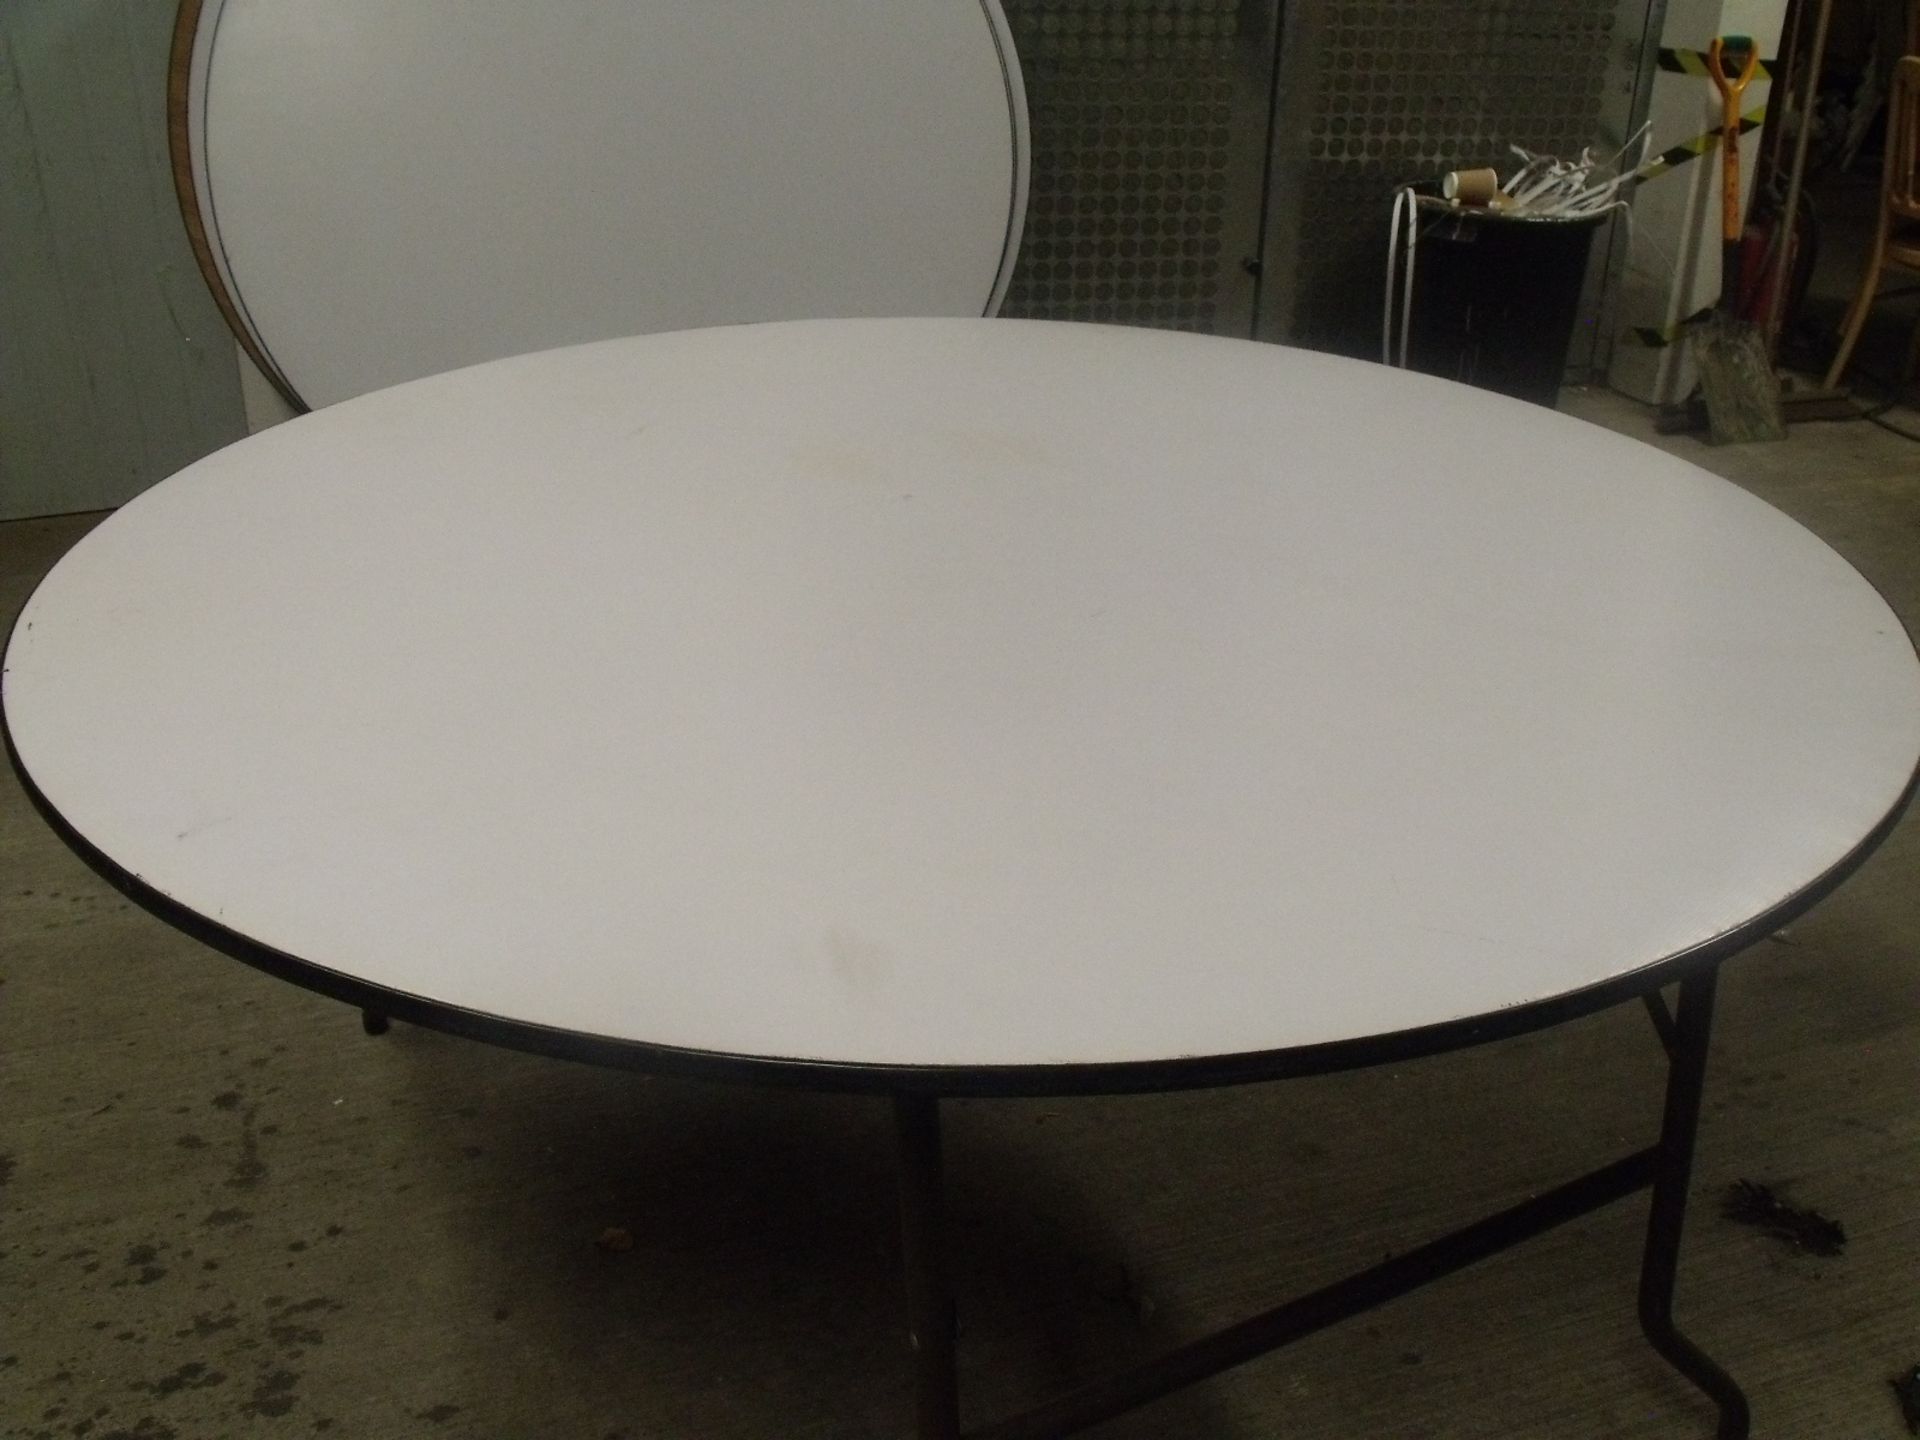 5 x 5ft round padded banqueting table tops only